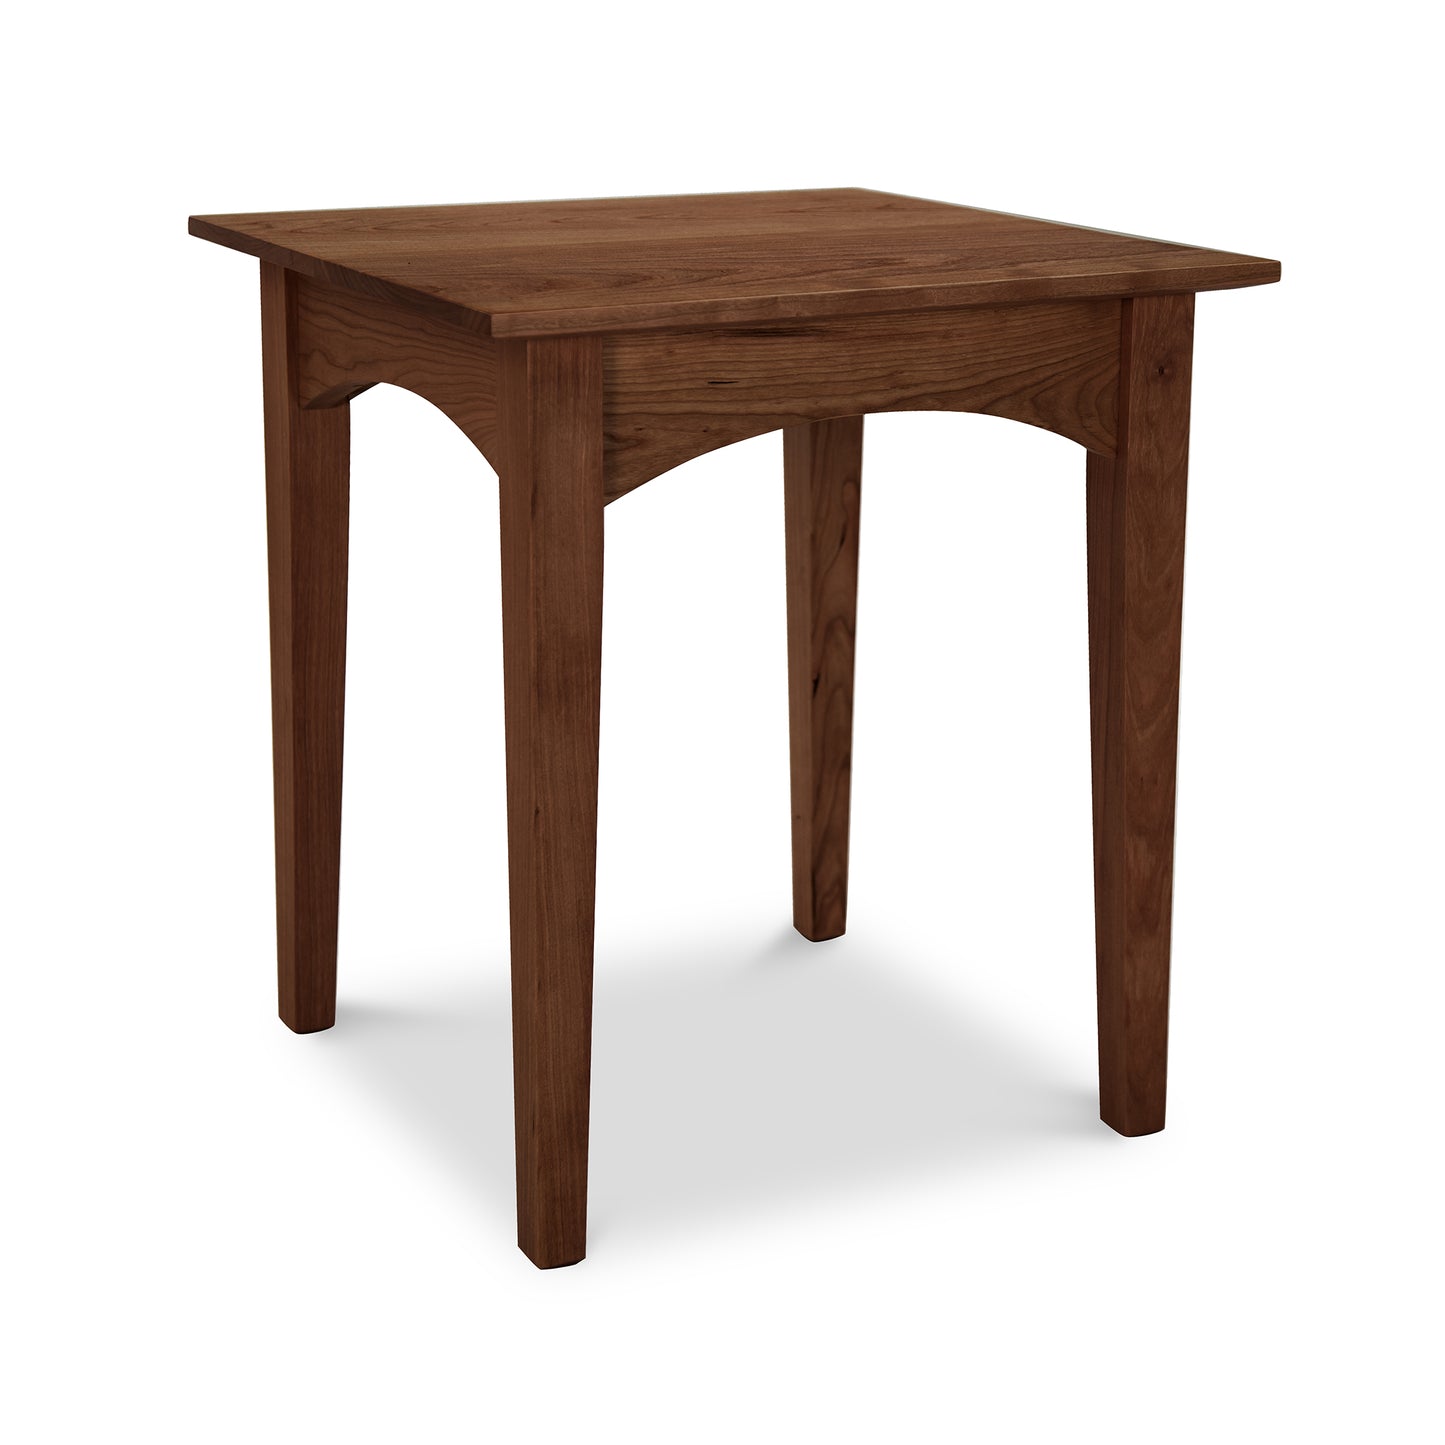 A simple wooden table with a square top and four straight legs, crafted in the Vermont traditional craftsmanship style, isolated on a white background. The American Shaker End Table by Maple Corner Woodworks has a rich, dark brown finish, showcasing visible wood.